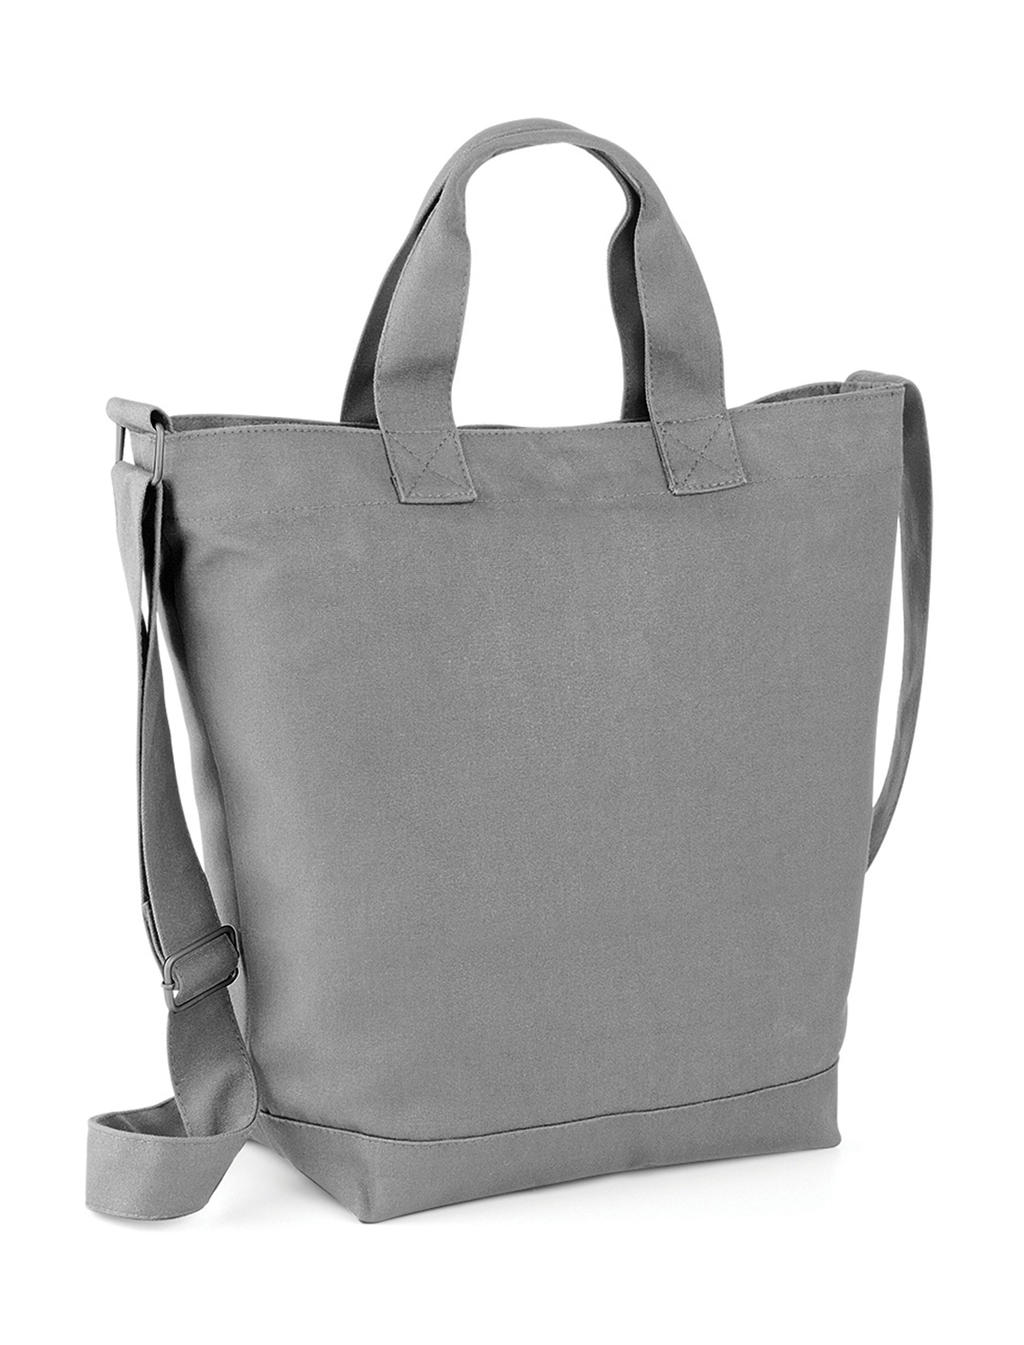  Canvas Day Bag in Farbe Light Grey